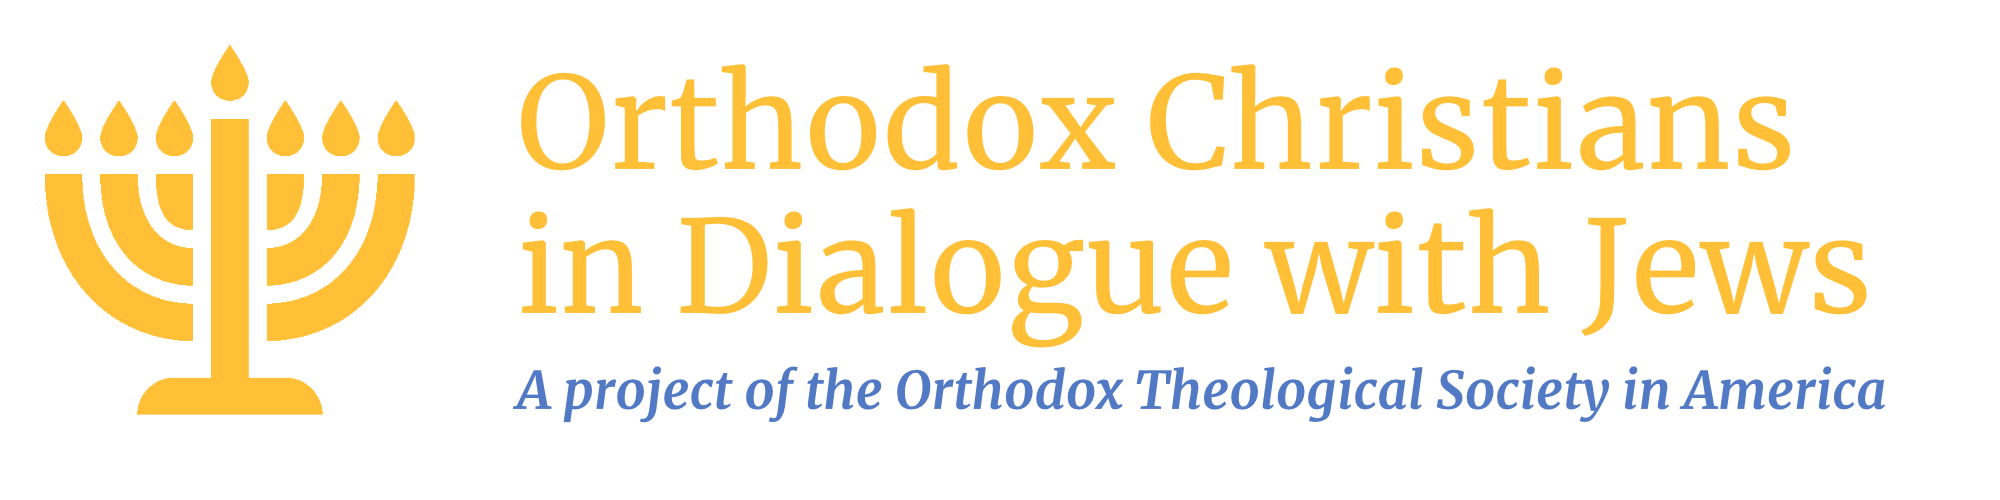 Orthodox Christians in Dialogue with Jews